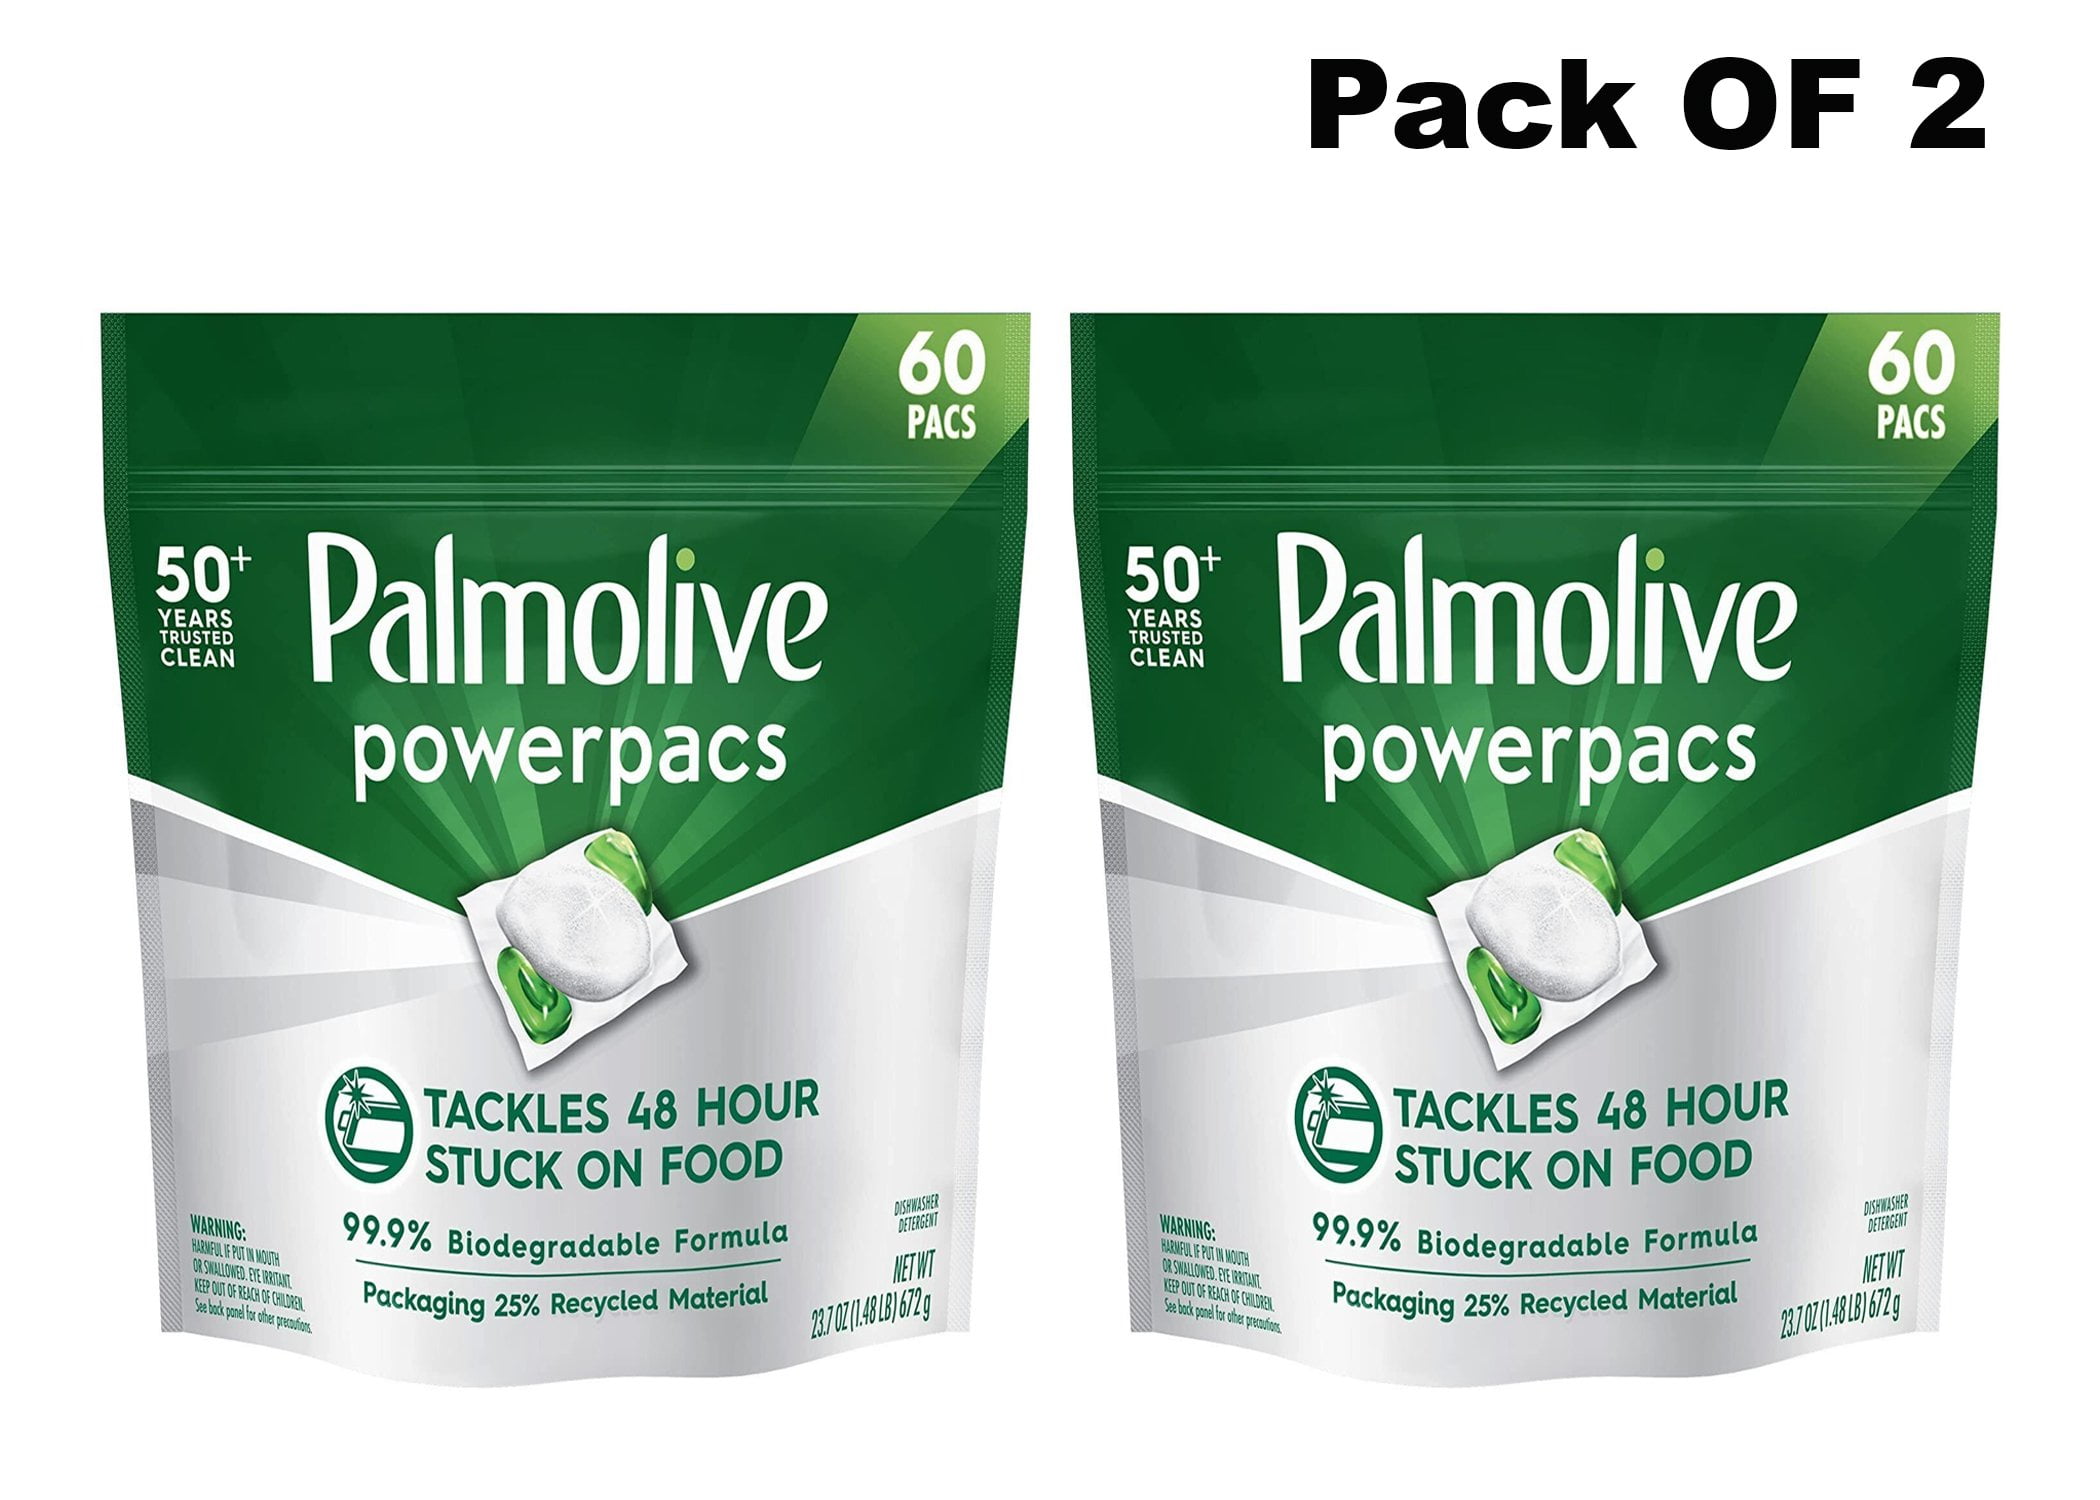 Buy Palmolive Travel Minis Pack Online at Chemist Warehouse®